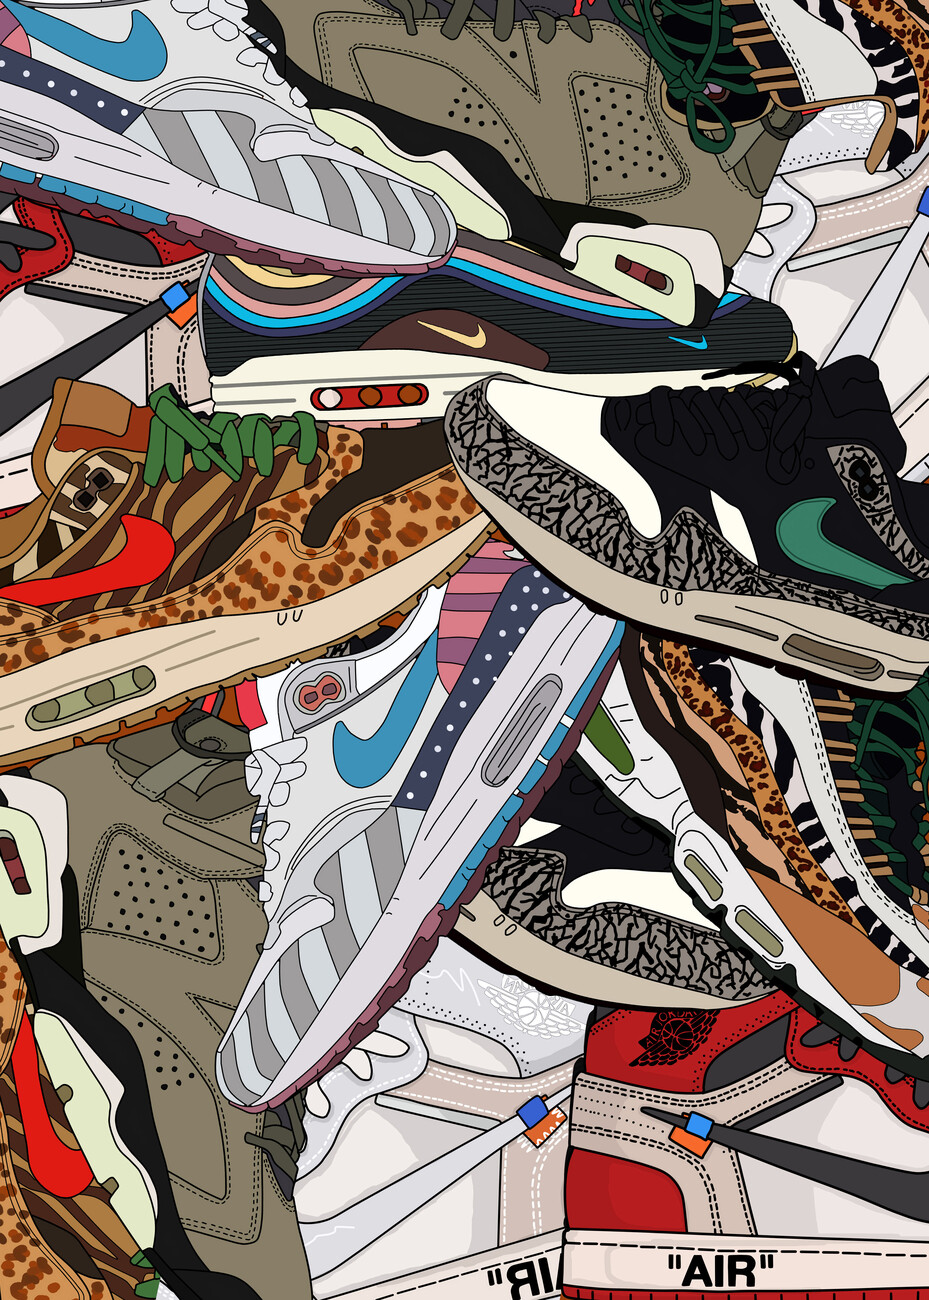 Sneaker Stock Illustrations, Cliparts and Royalty Free Sneaker Vectors